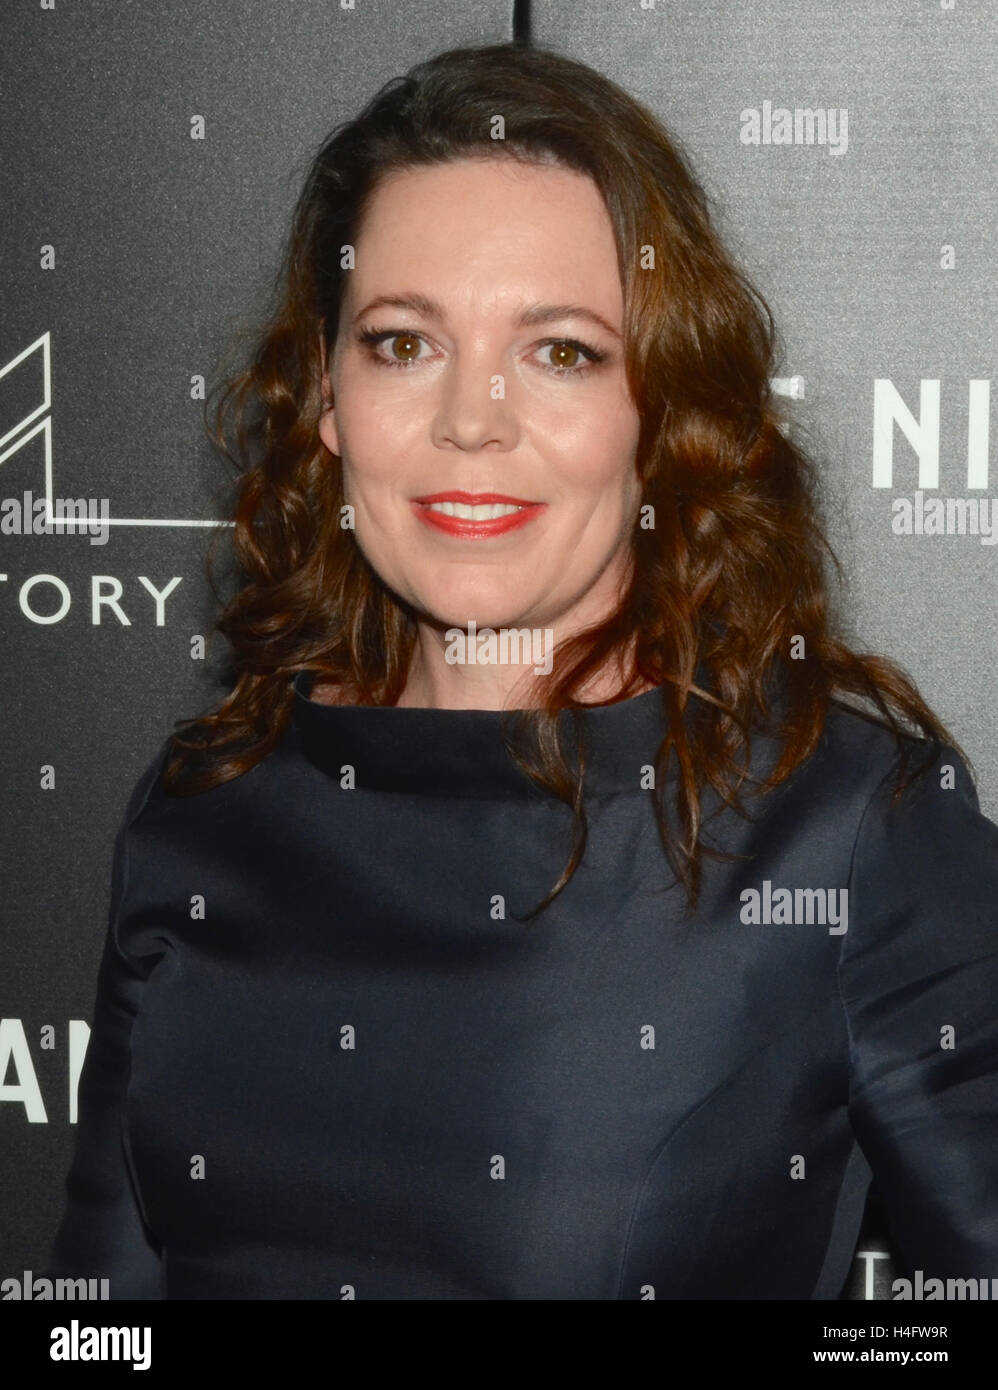 Olivia Coleman arrives for the Premiere Of AMC's 'The Night Manager' held at DGA Theater on April 5, 2016 in Los Angeles, California. Stock Photo